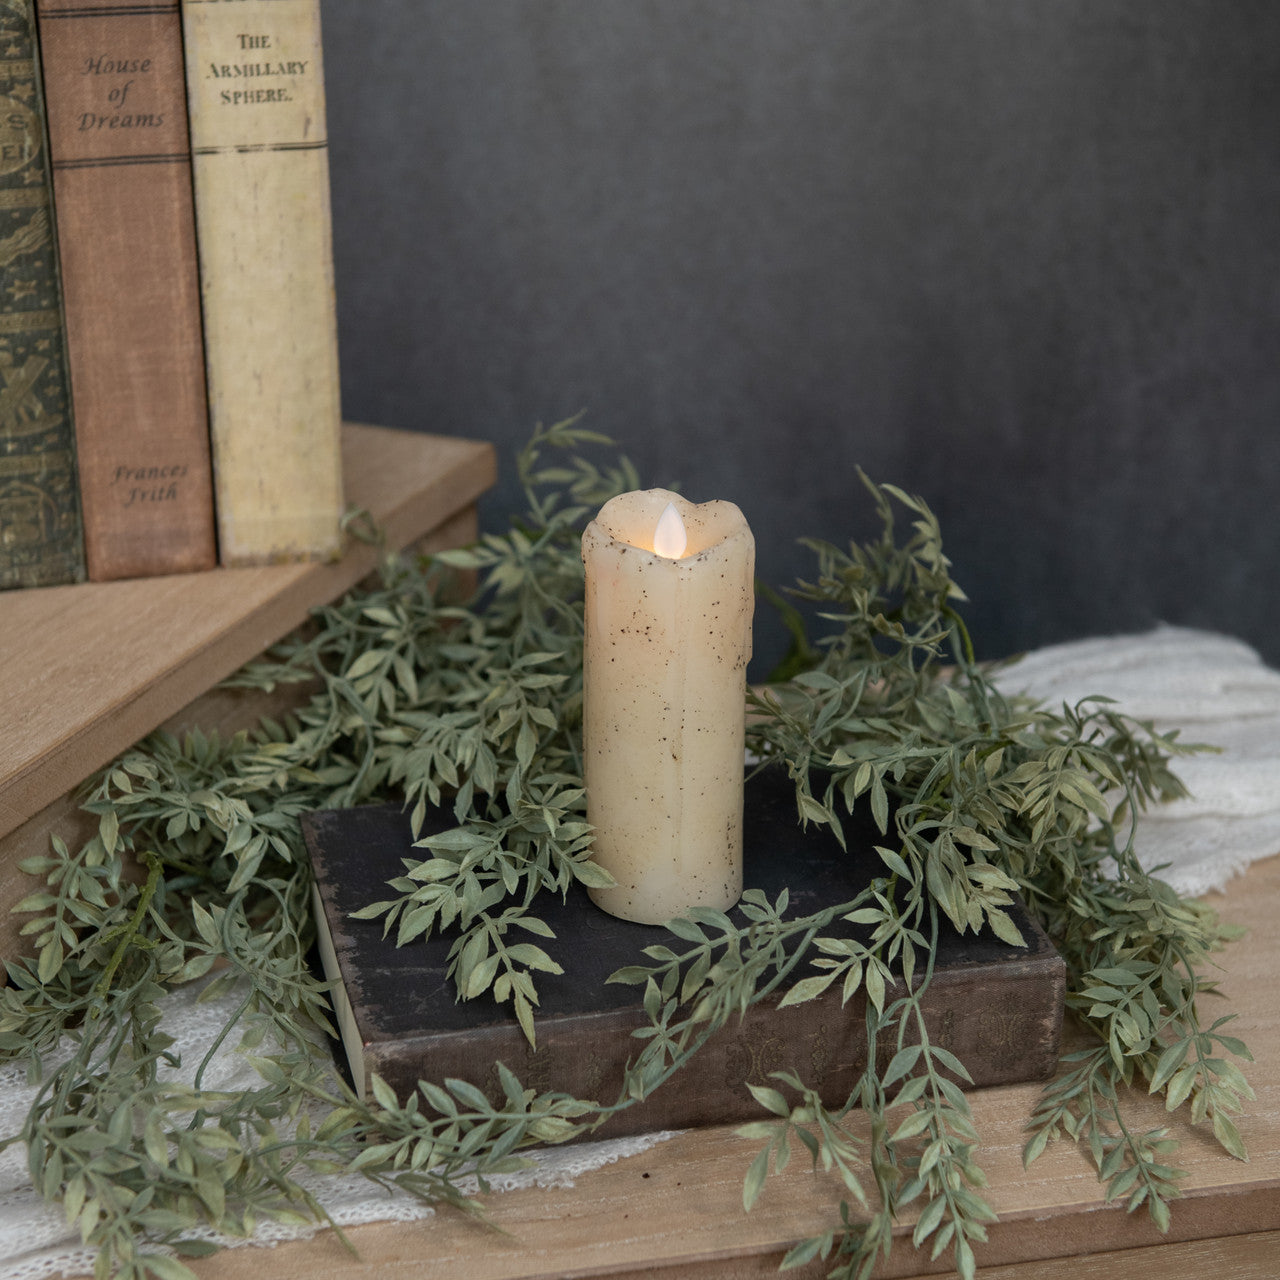 2X5" MOVING FLAME CREAM PILLAR CANDLE